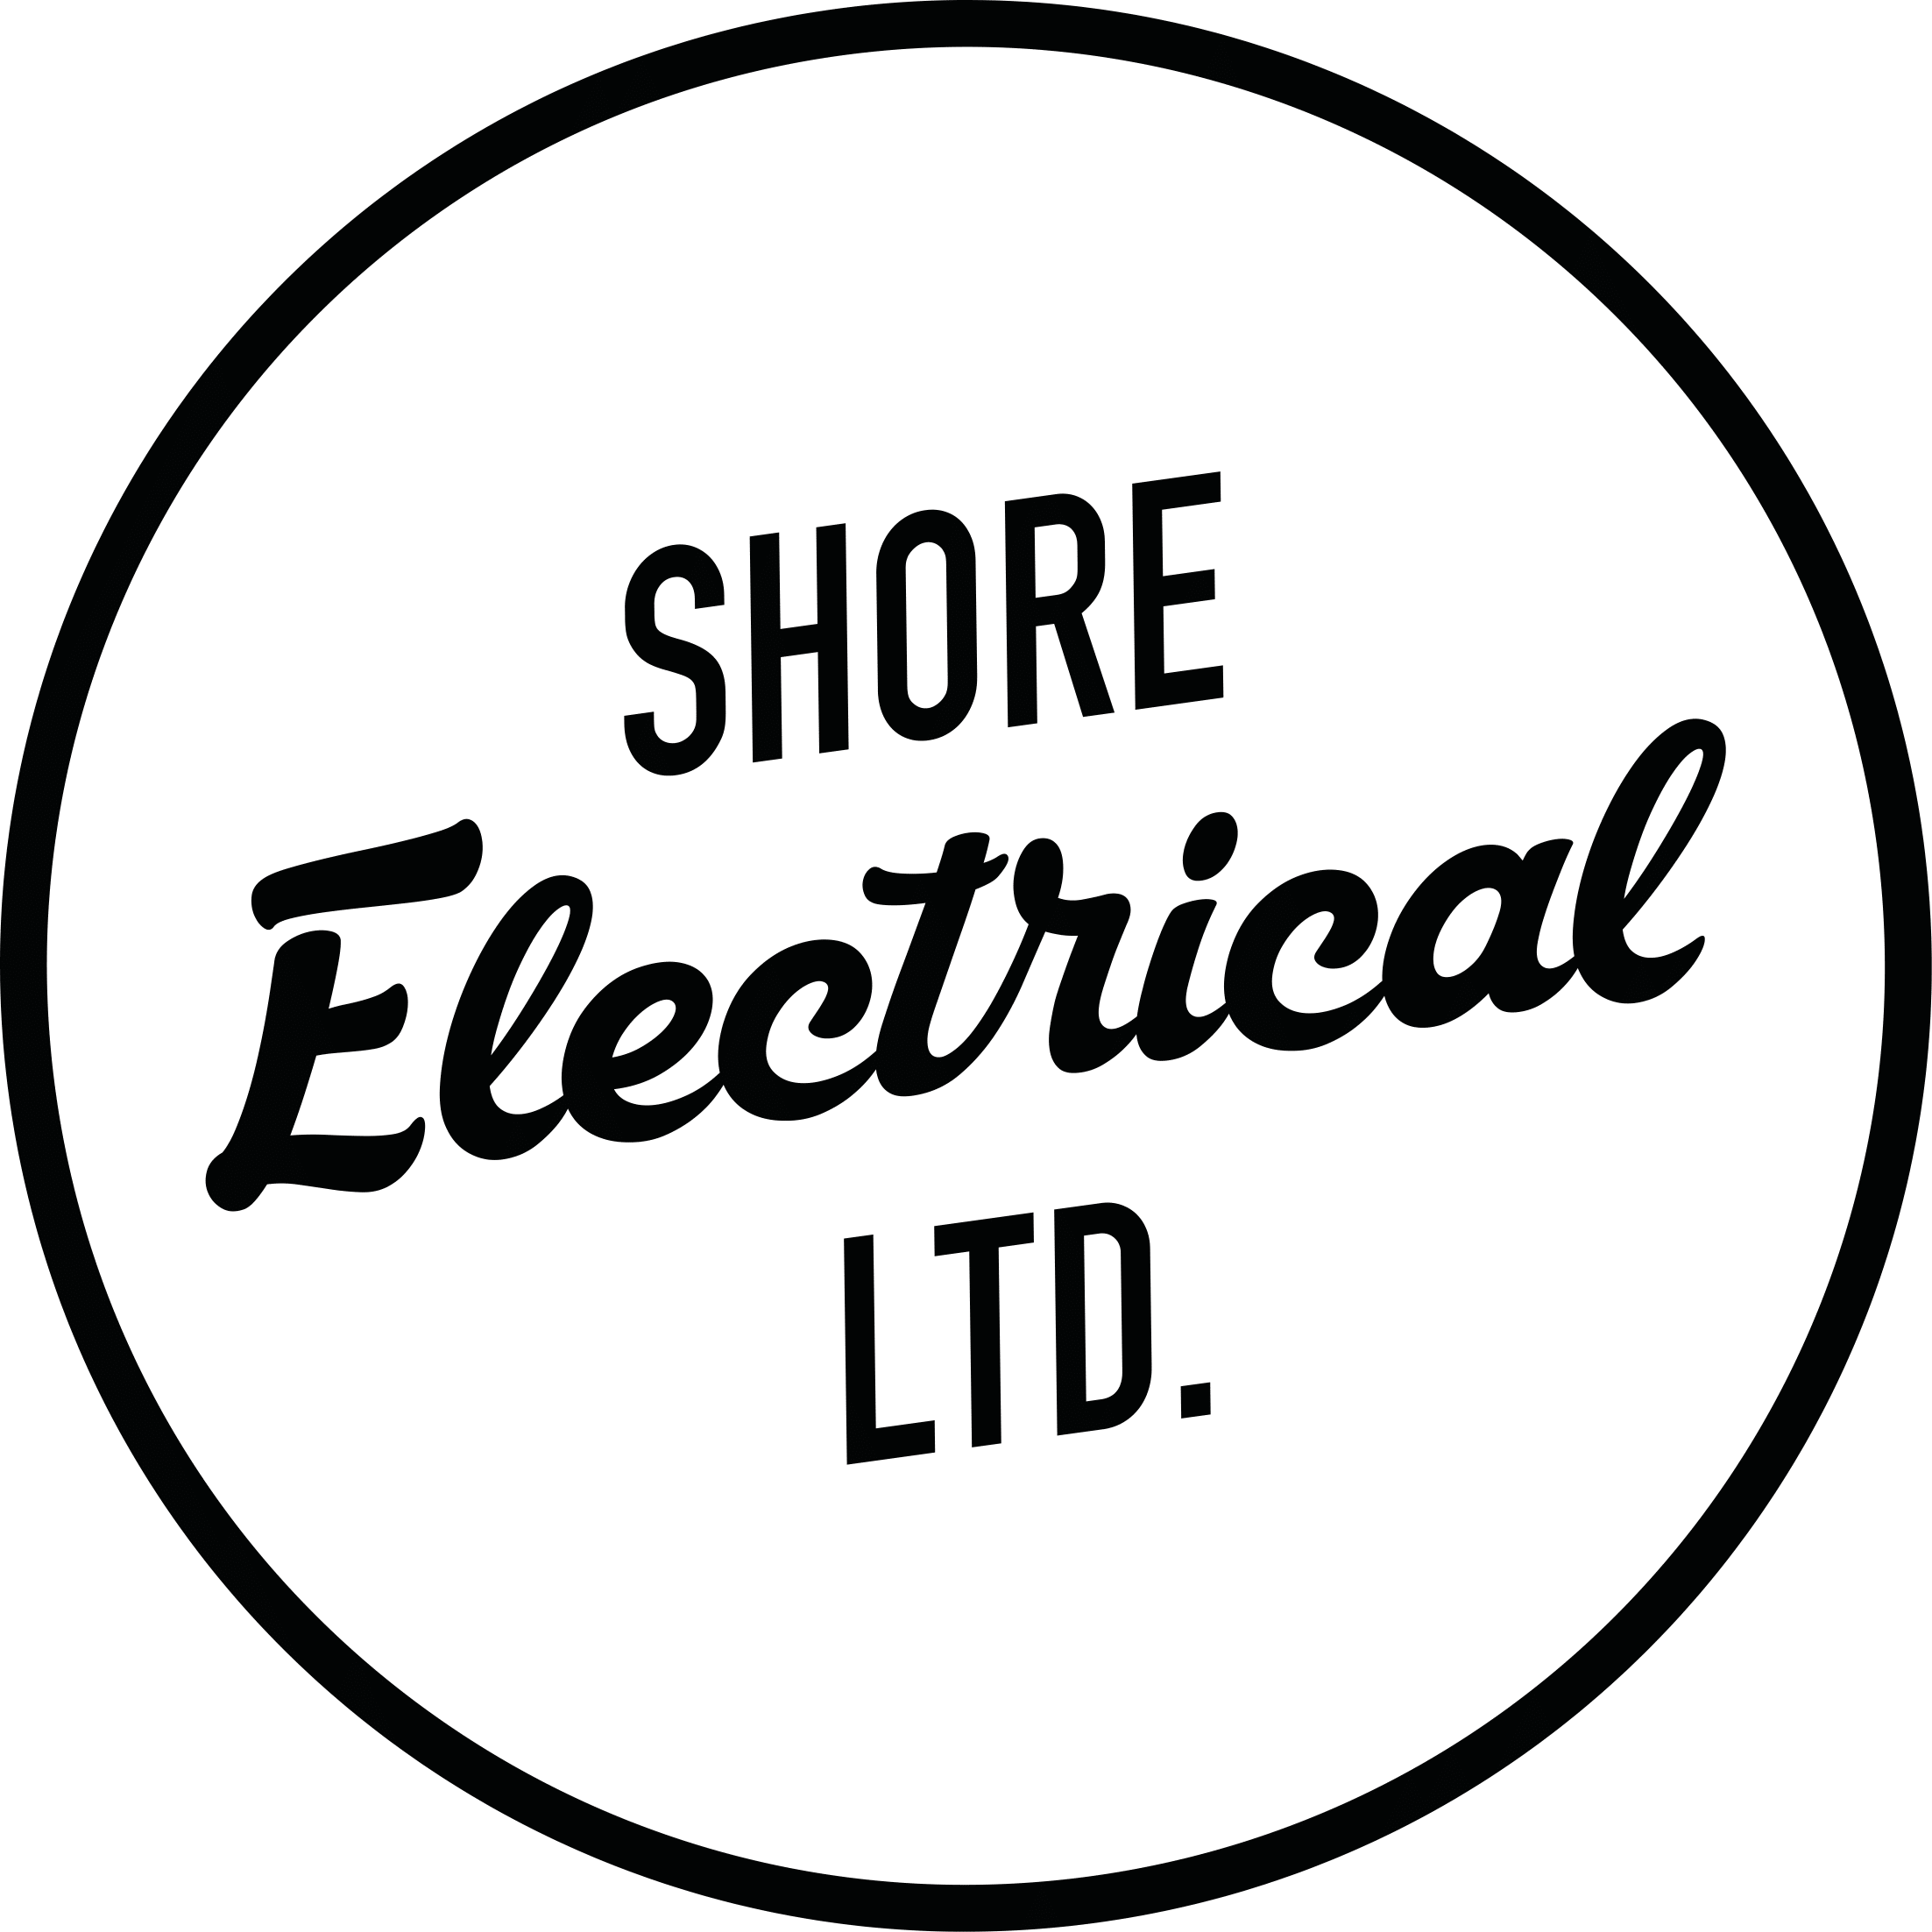 Shore Electrical